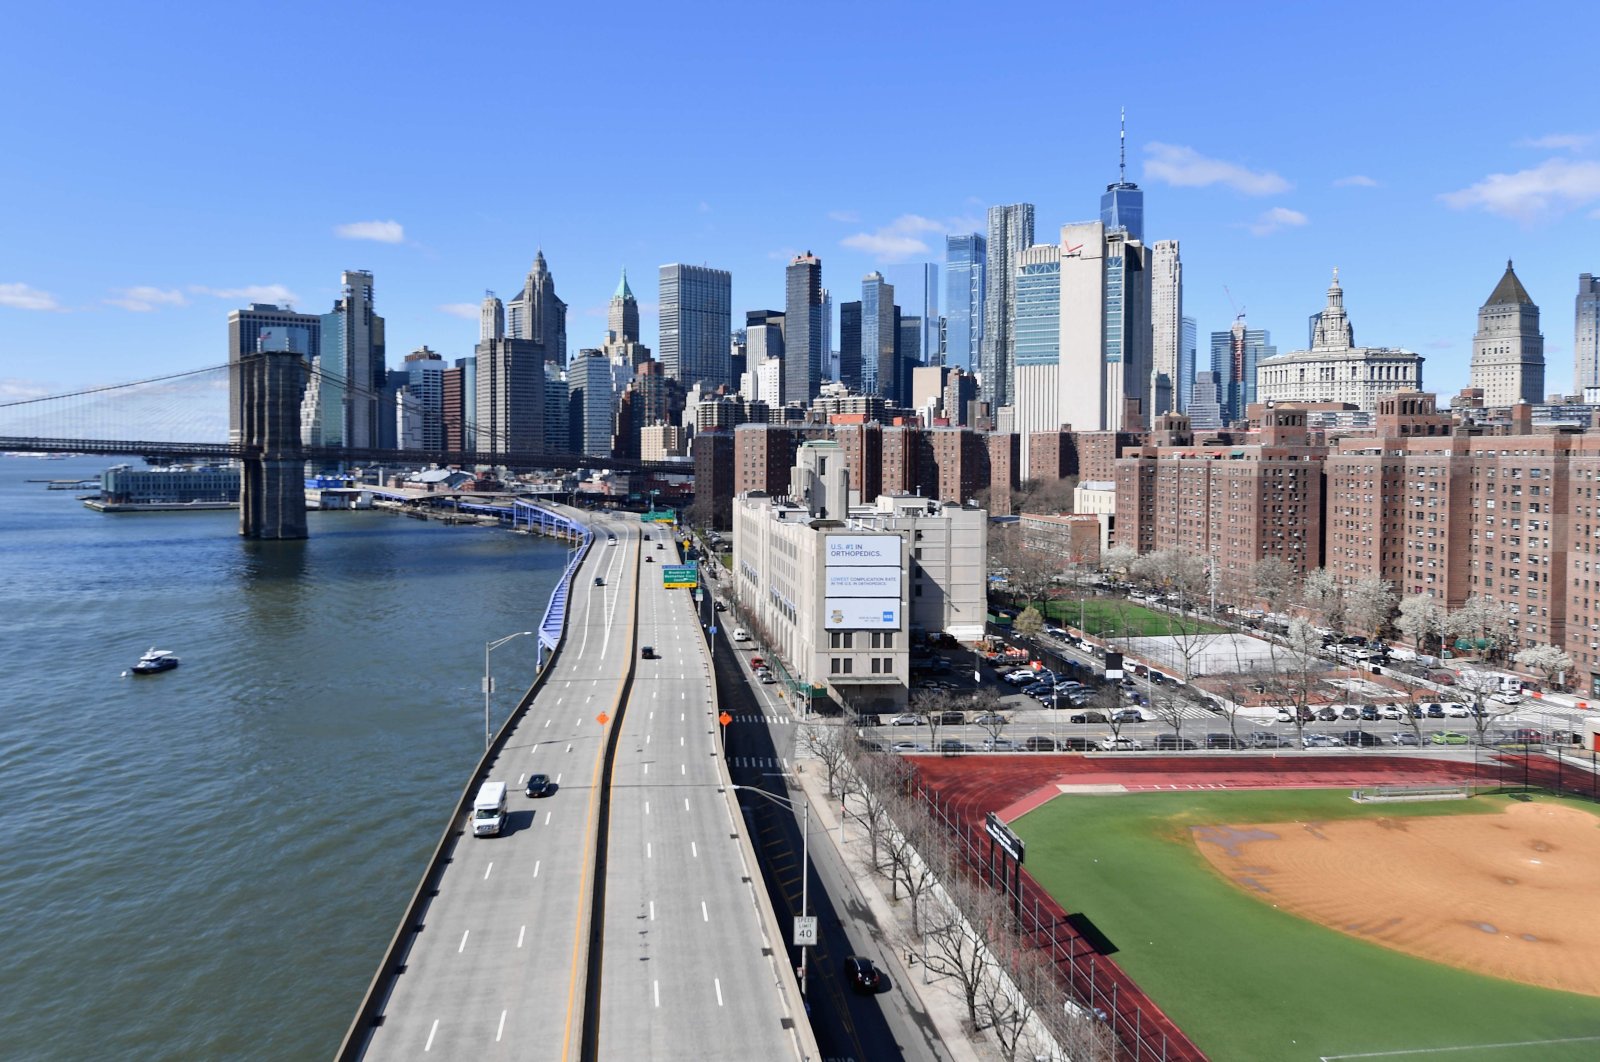 A view of morning traffic on FDR Drive is seen on March 24, 2020 in New York City. (AFP Photo)